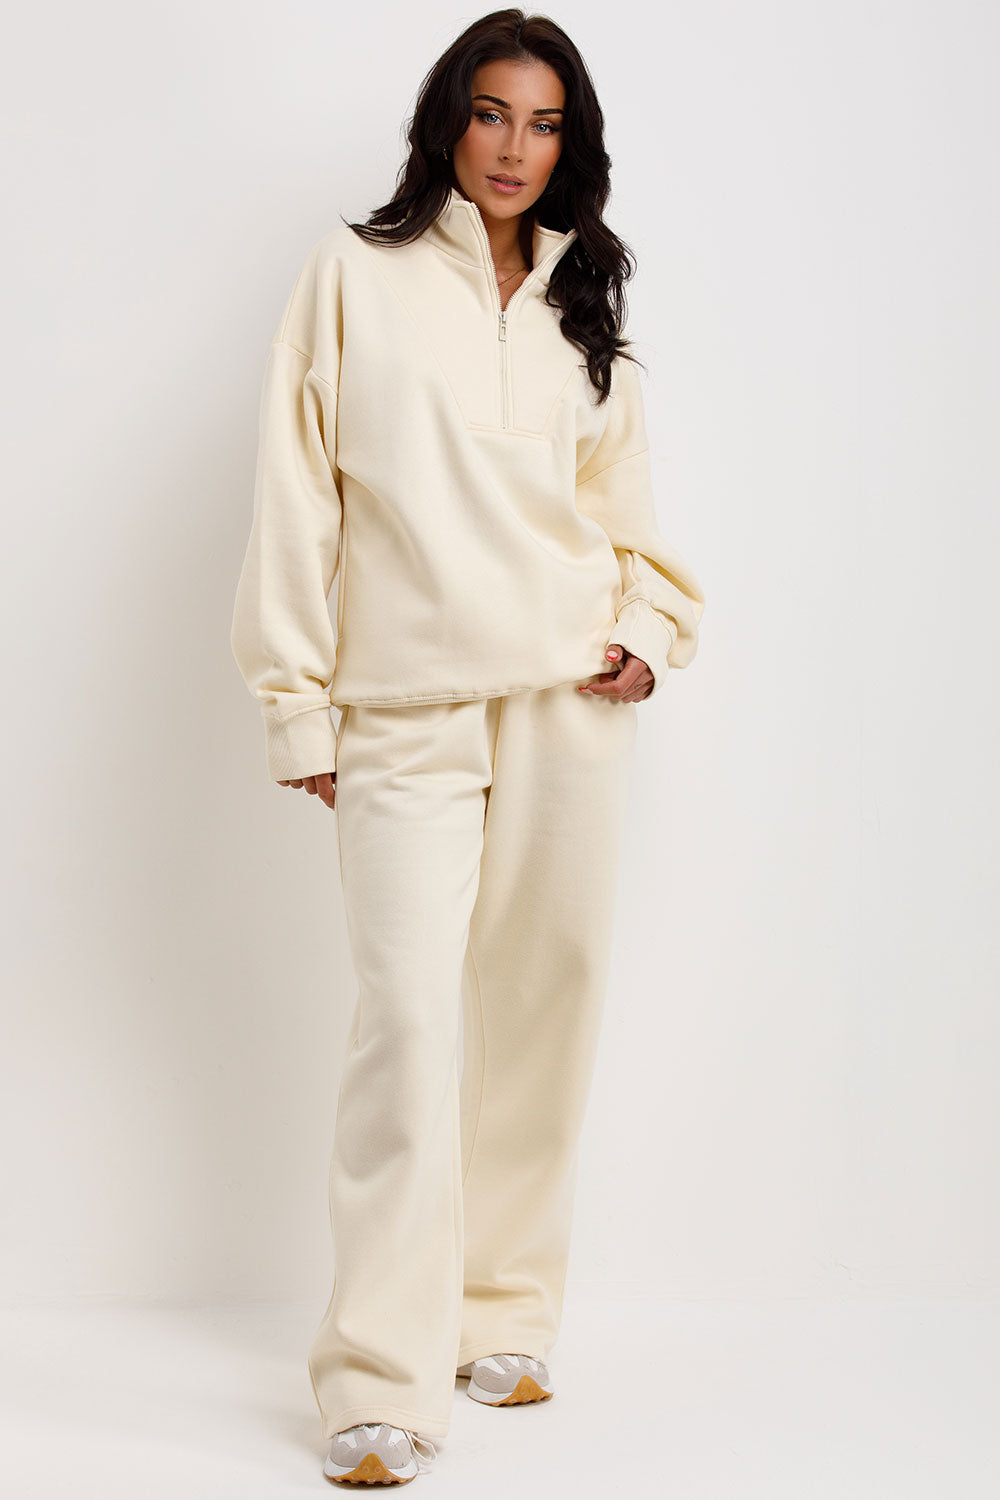 half zip sweatshirt and joggers loungewear co ord set airport outfit